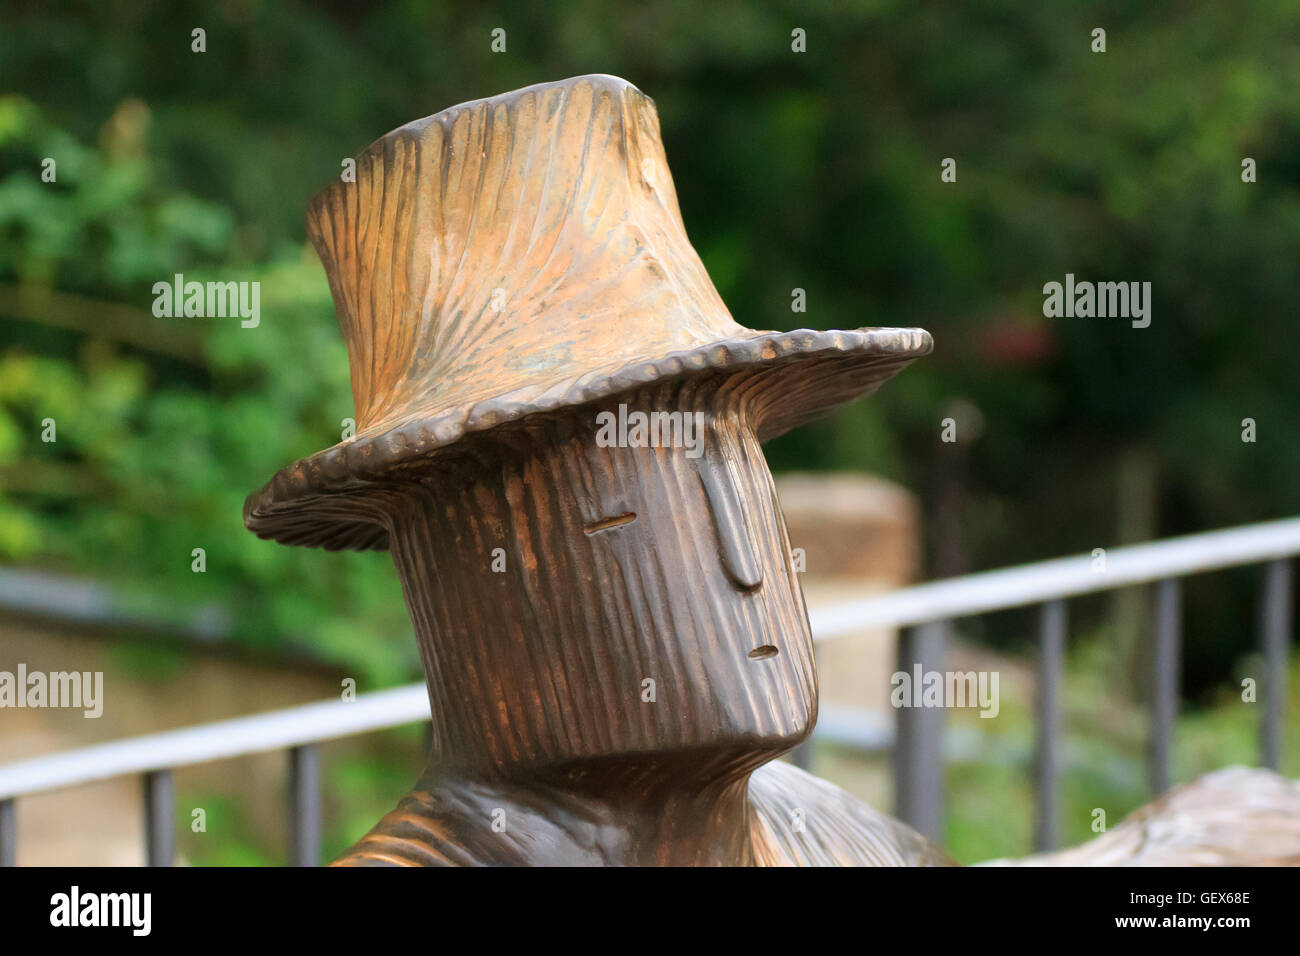 Tolon's sculpture from Rose Garden, Florence, Italy Stock Photo